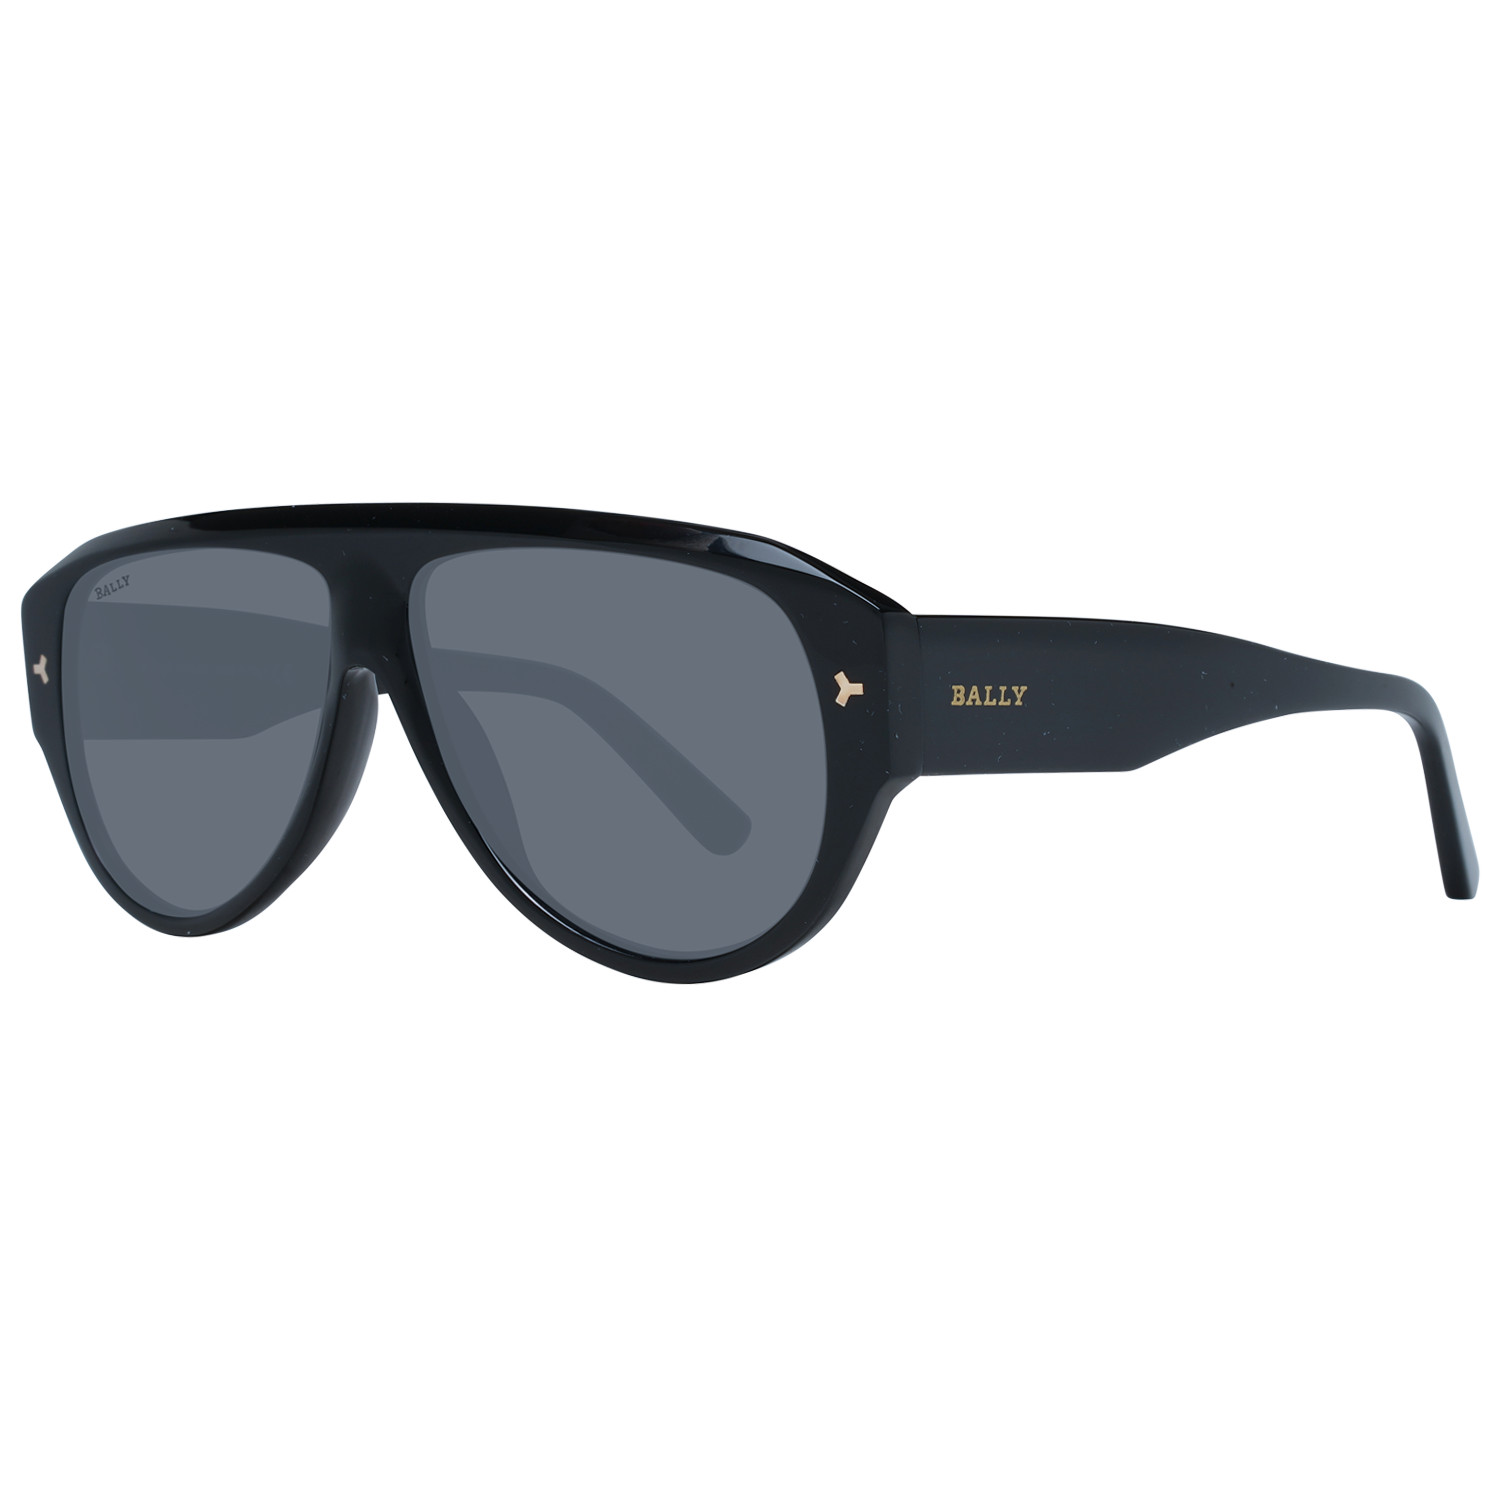 Bally Sunglasses BY0038-D 28C Cooper Gold Mirrored – Discounted Sunglasses